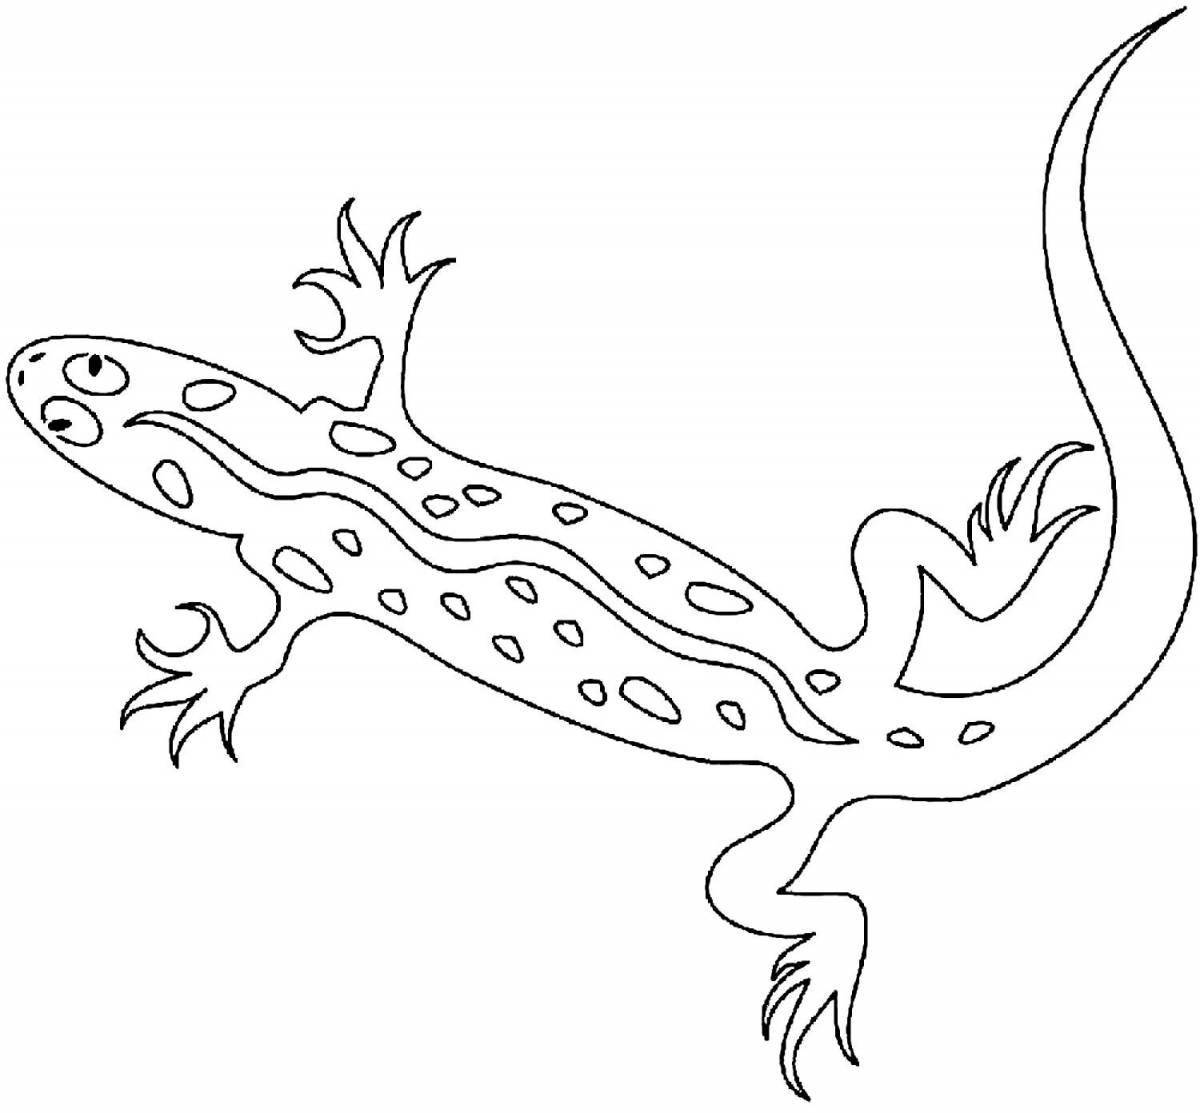 Glowing new coloring page